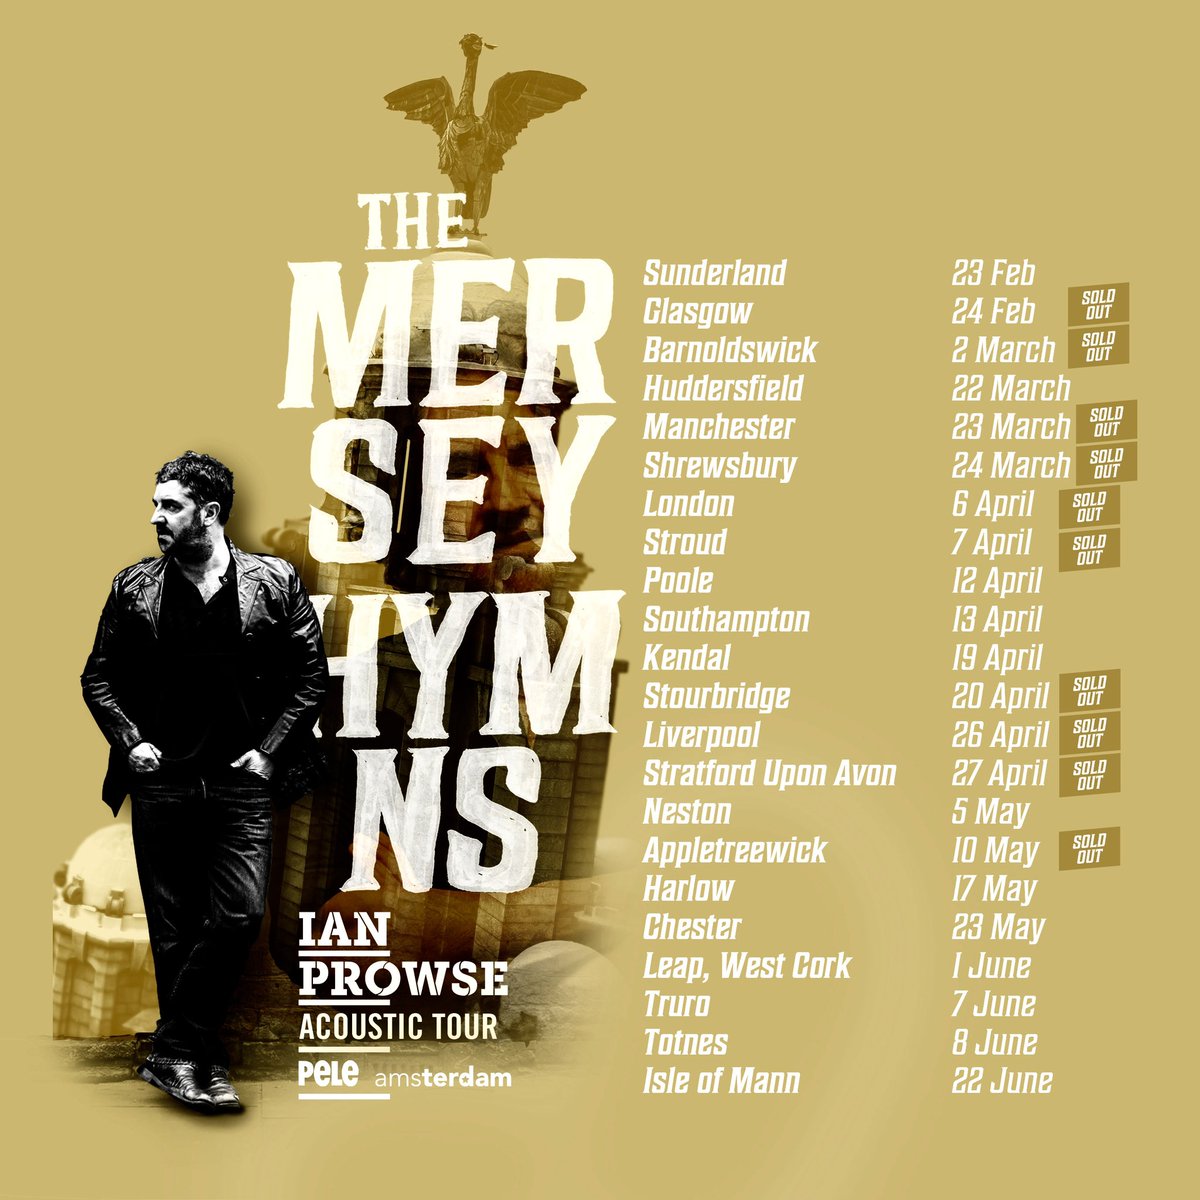 This Mersey Hymns tour has been something else, Sell Out shows & hearts lifted all across the land. 
Tickets still left for Neston, Chester, Harlow, West Cork, Truro, Totnes & the Isle of Mann. 
Amsterdam-music.com/live/